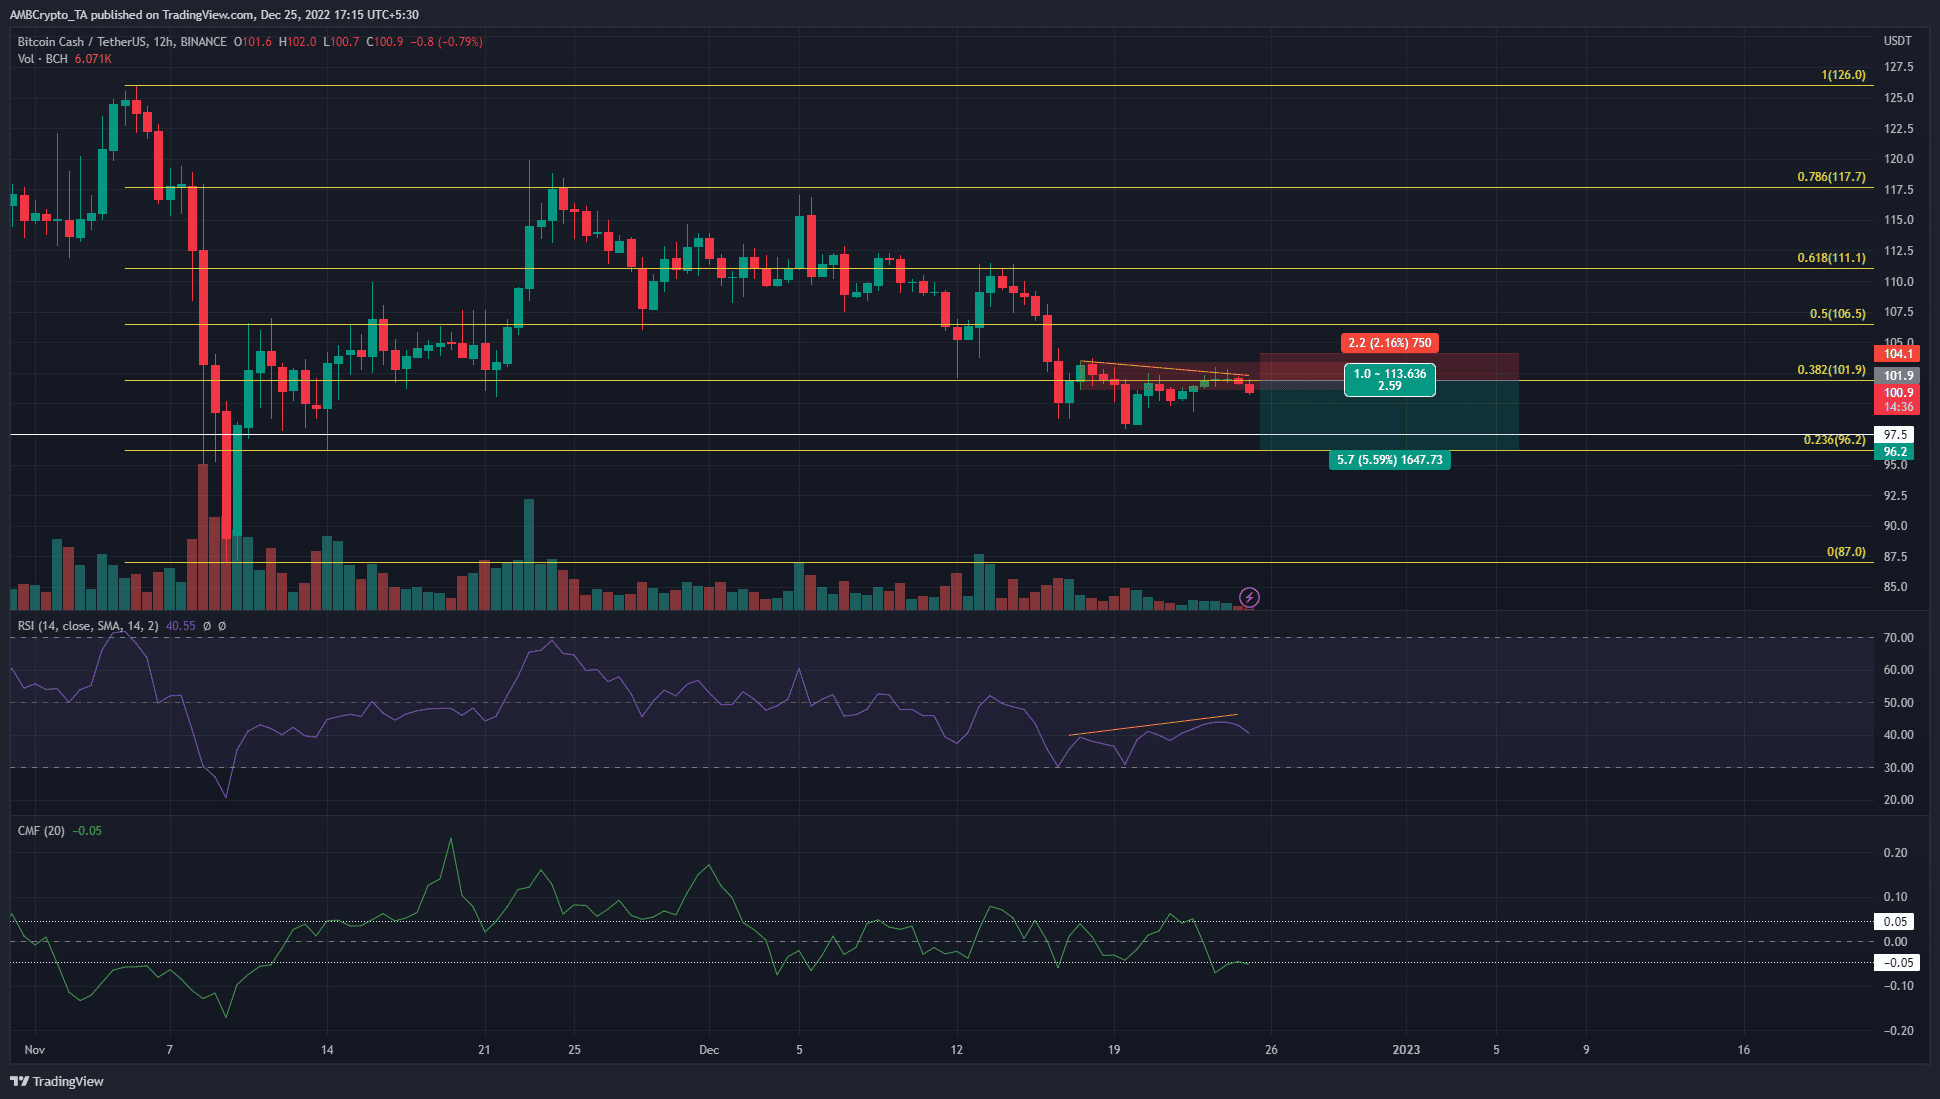 Bitcoin Cash has a bearish structure and sellers remain dominant